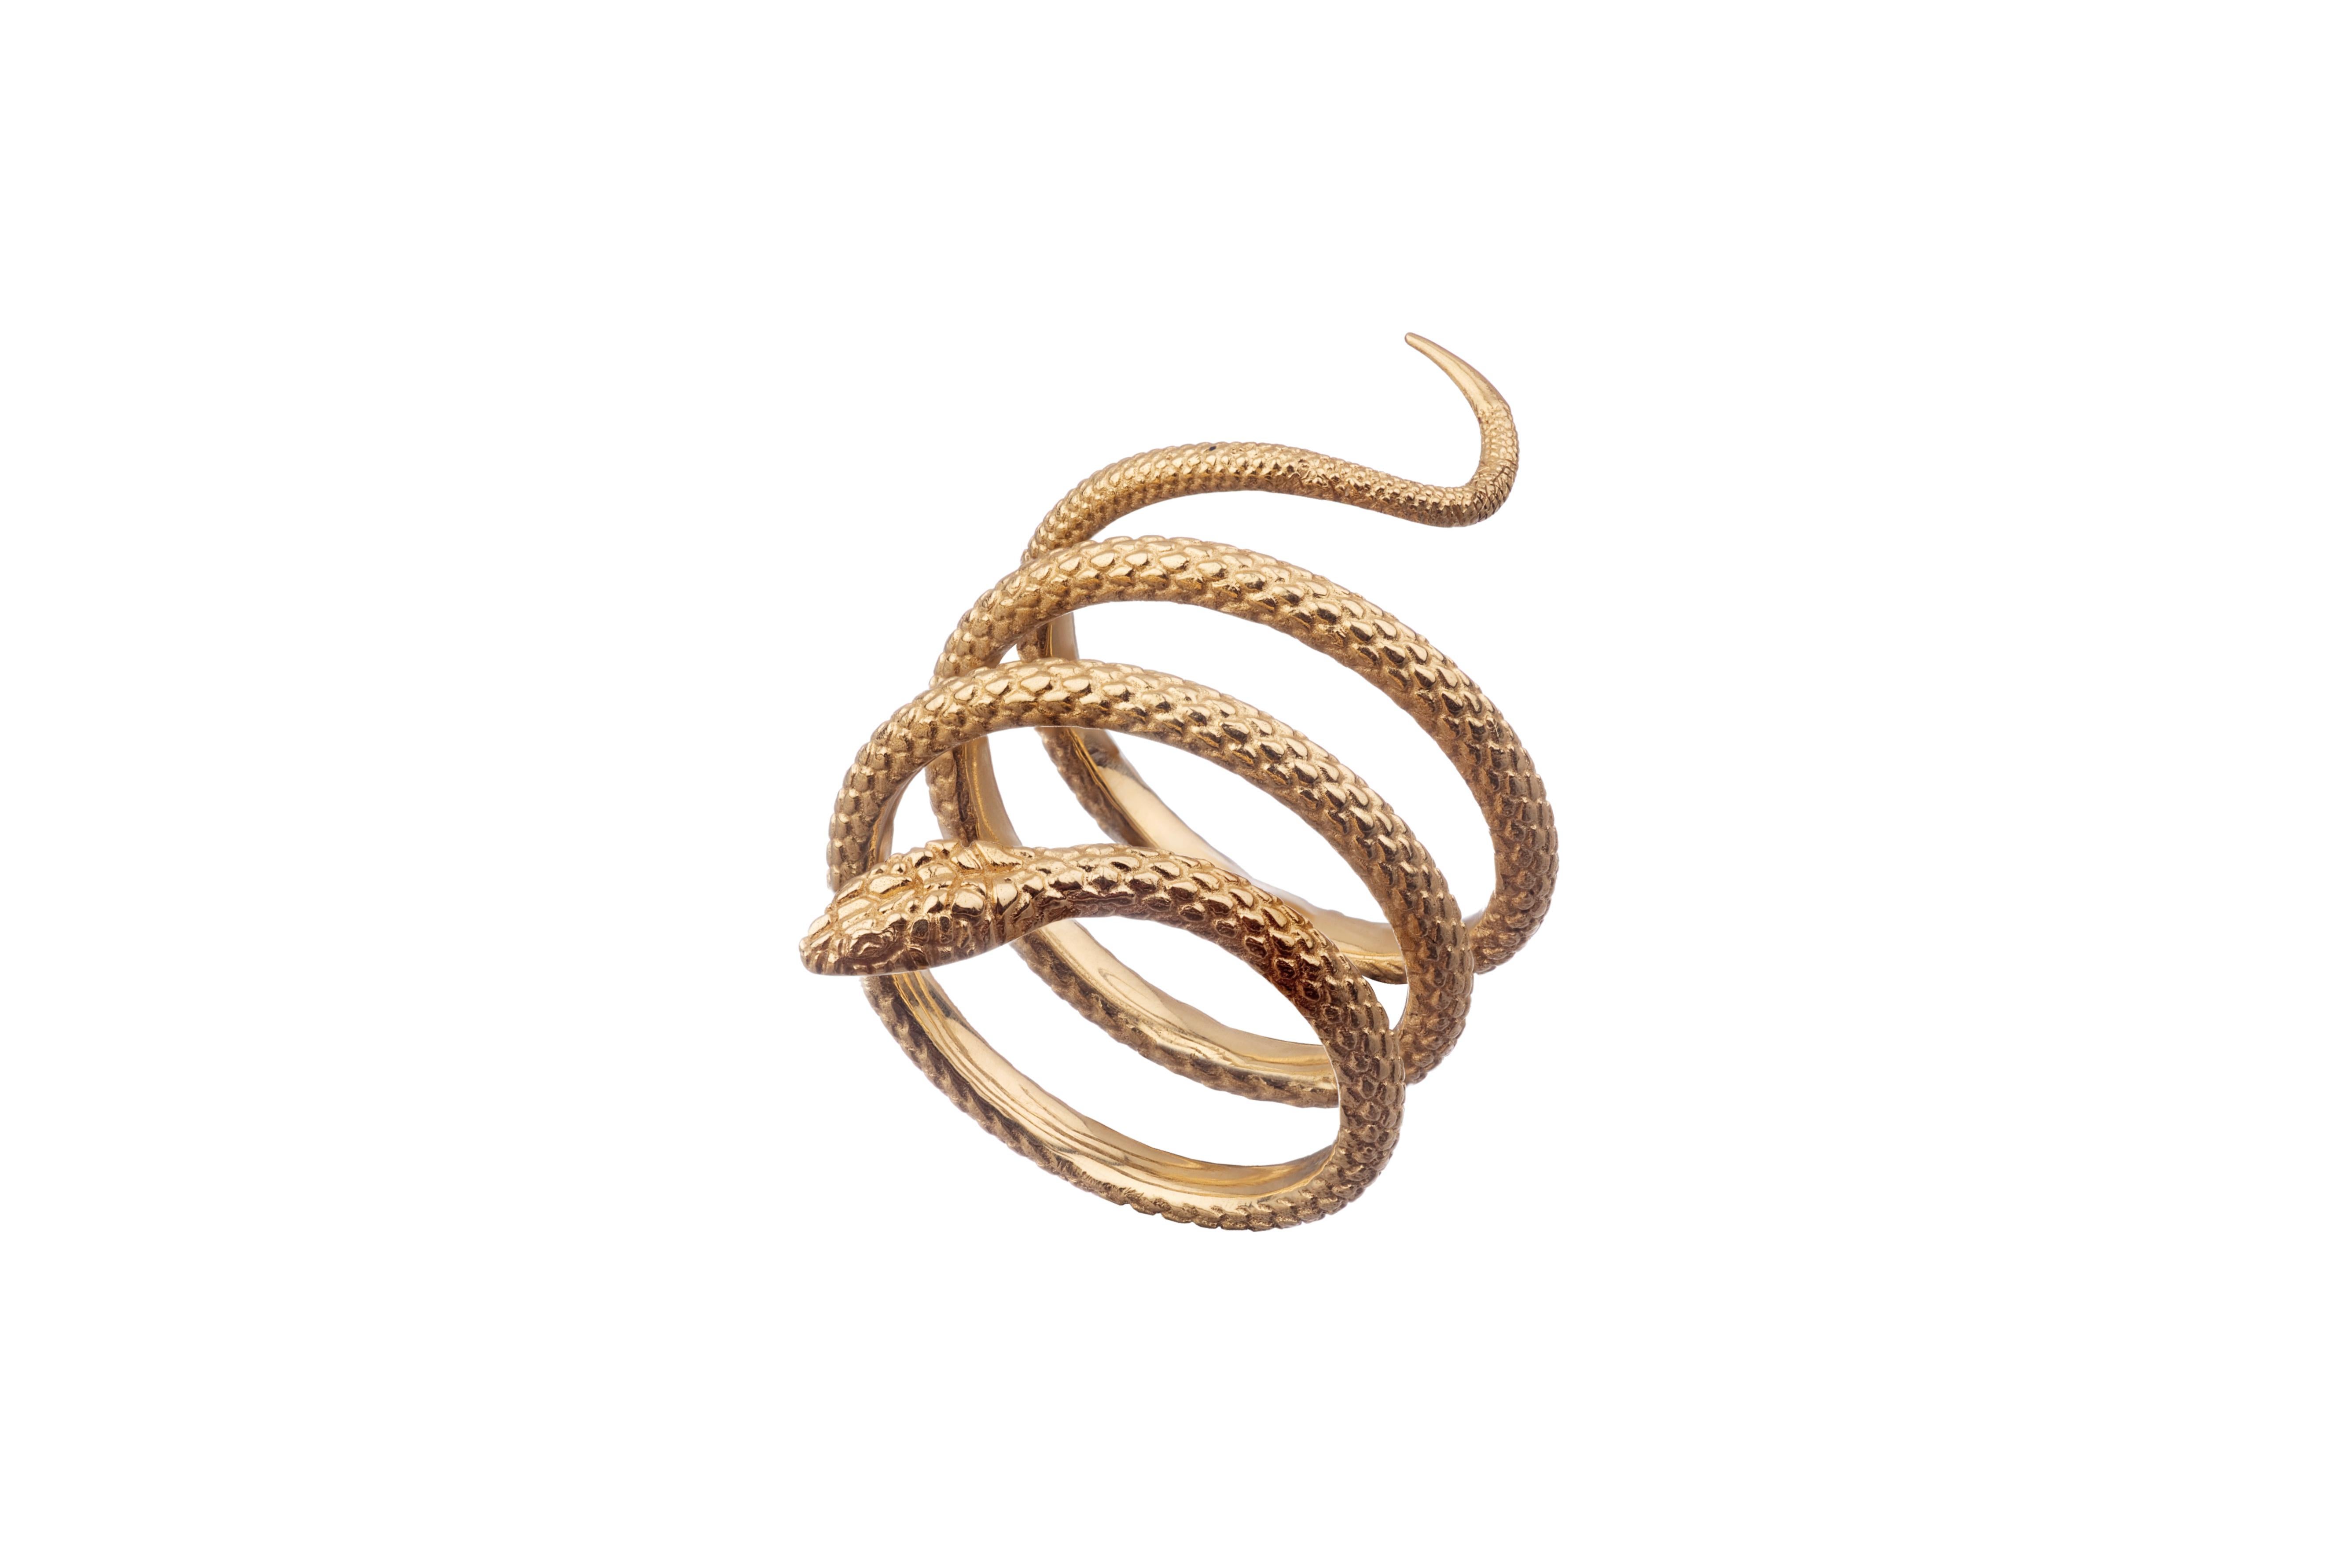 OUROBOROS' 'Sexy Sixtyniner,' 18kt rose gold, white gold and yellow gold snakes that screw together to be worn as one or separately.

These rings come in a variety of sizes so please contact the designer. 

OUROBOROS’ commitment to using only the